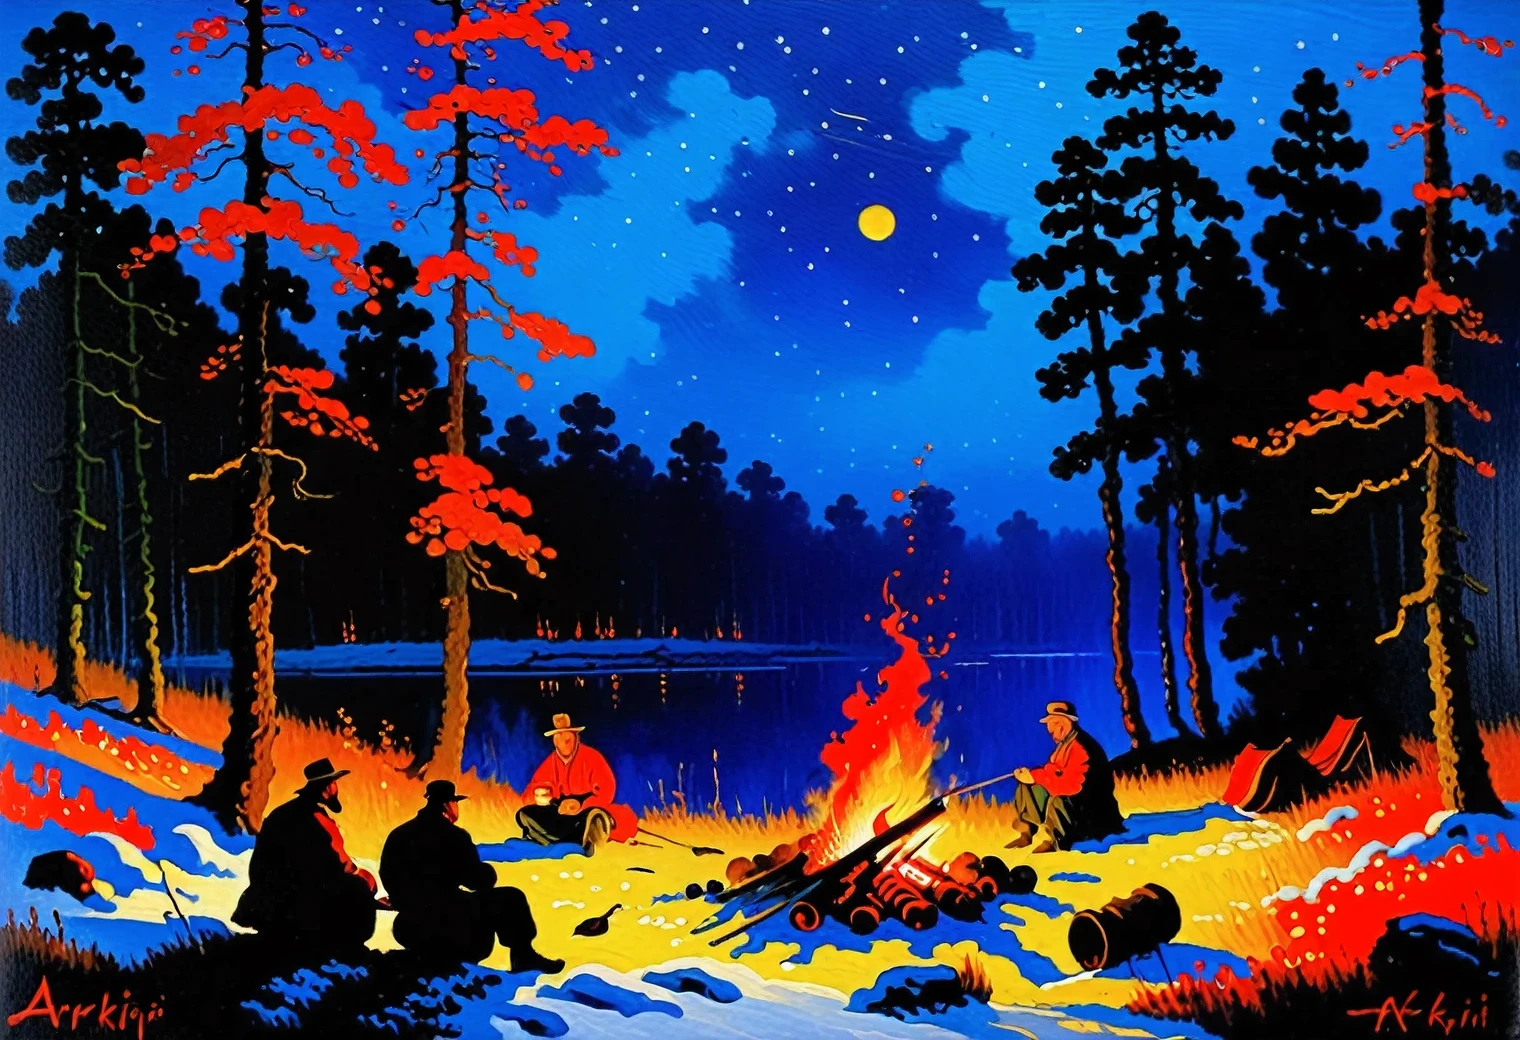 Painting by the artist Arkhip Kuindzhi, Campfire in the night forest, oil on canvas, full compliance with the style of Arkhip Kuindzhi, inspired by Albert Bierstadt, Jacek Jerk